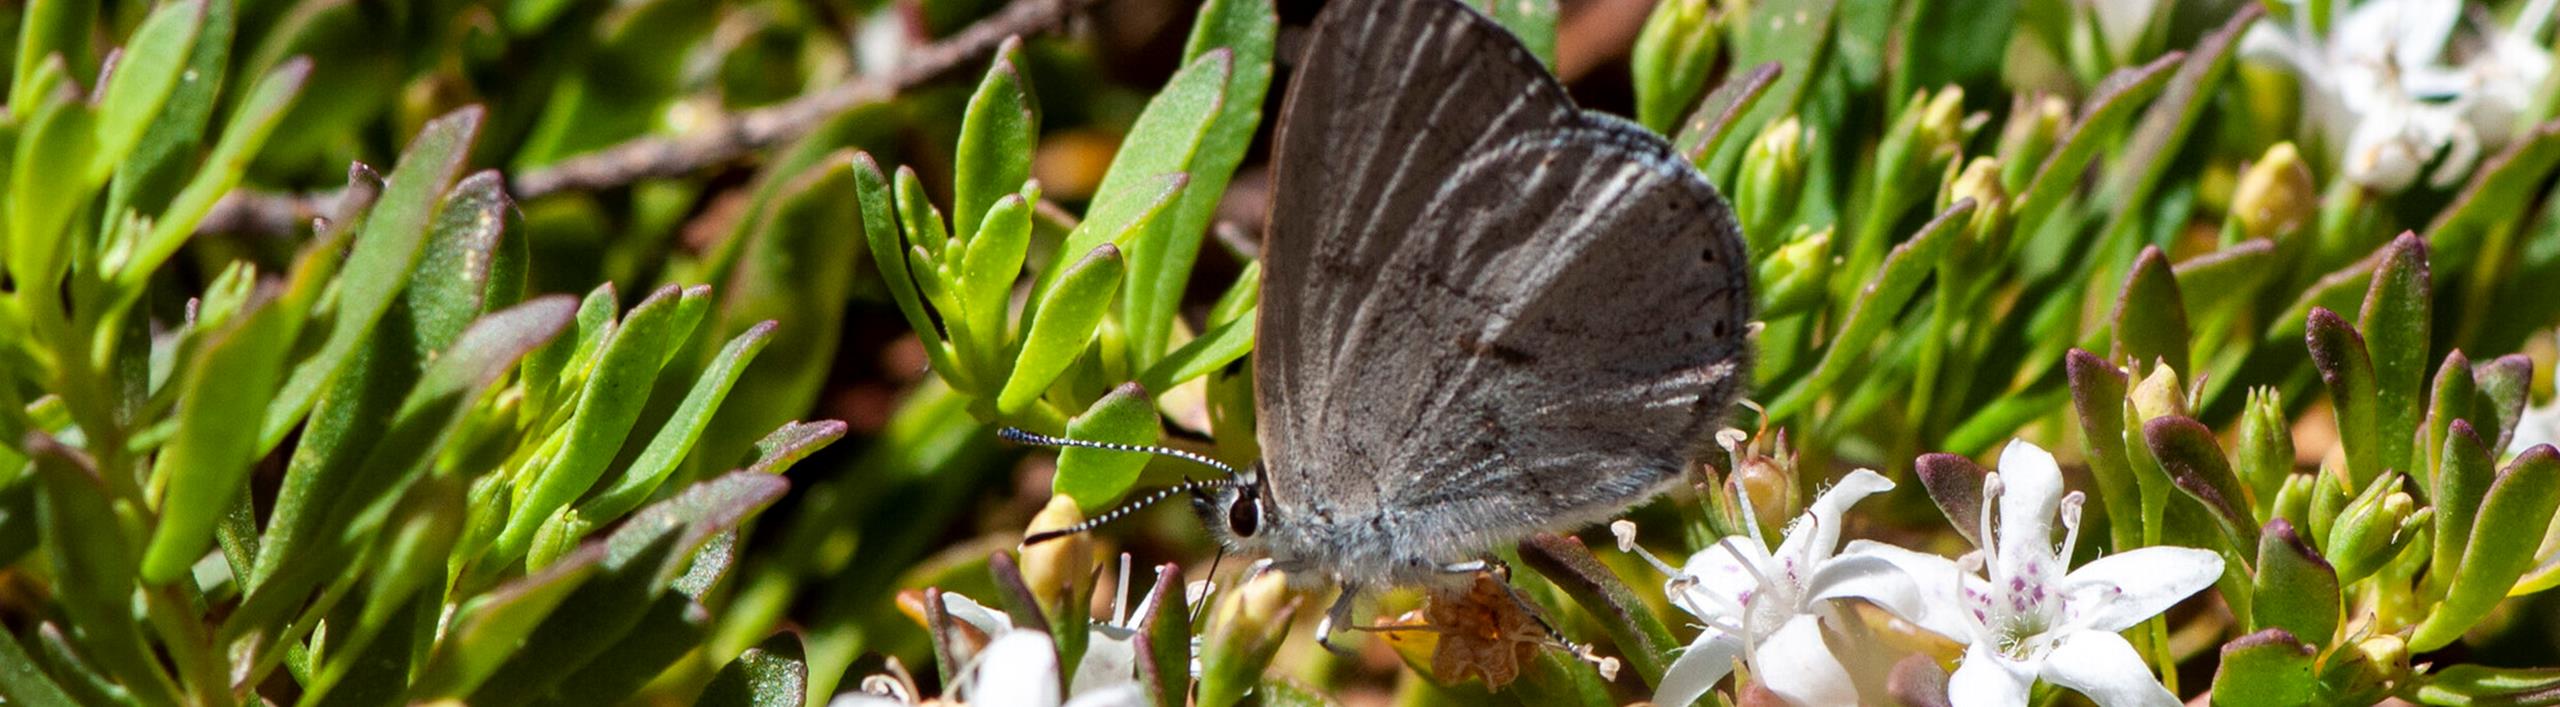 A Golden-rayed Blue Butterfly (a grey and brown butterfly) sitting on a green plant with white flowers.